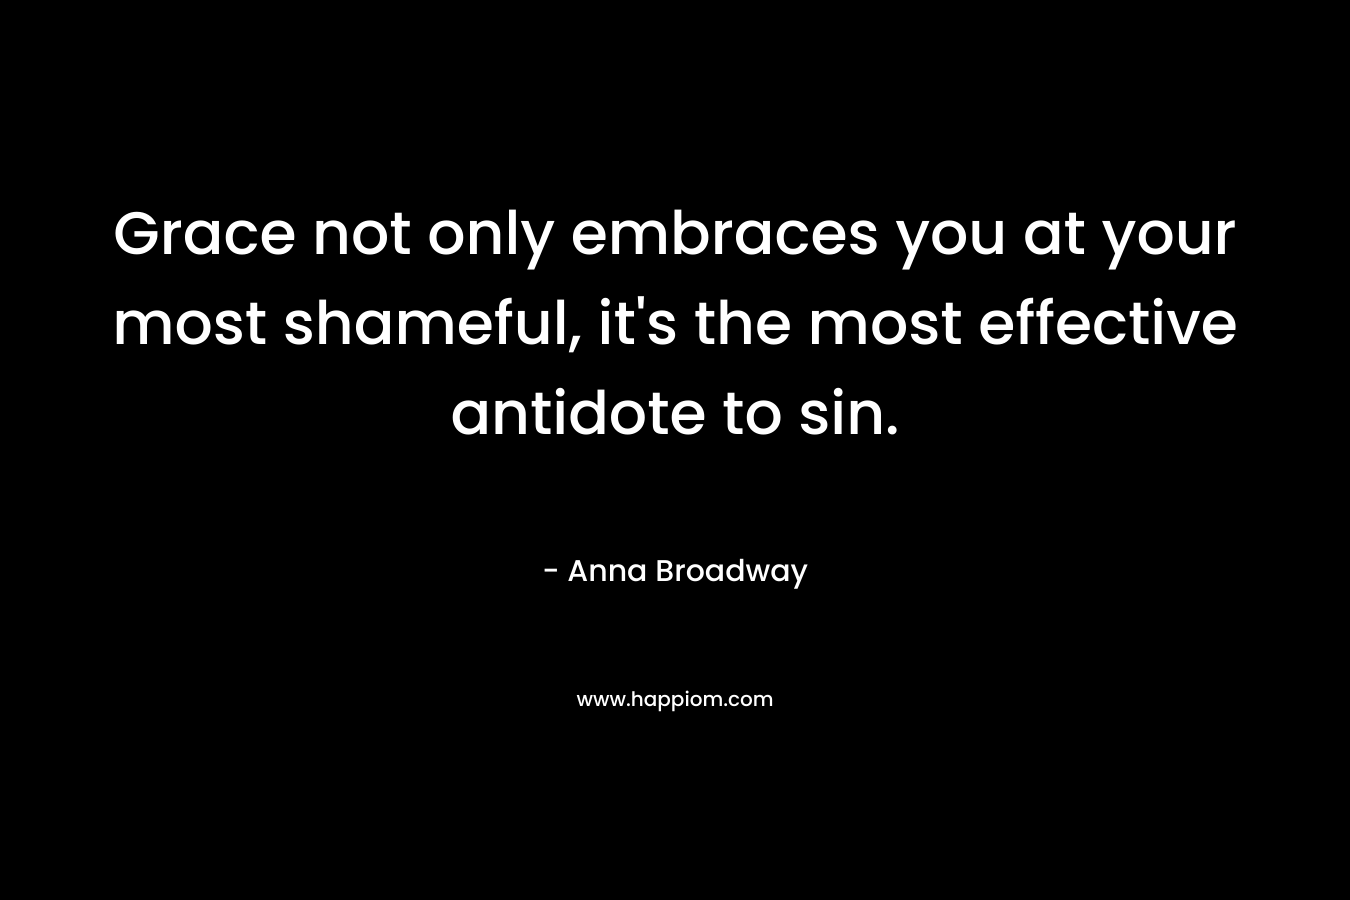 Grace not only embraces you at your most shameful, it's the most effective antidote to sin.